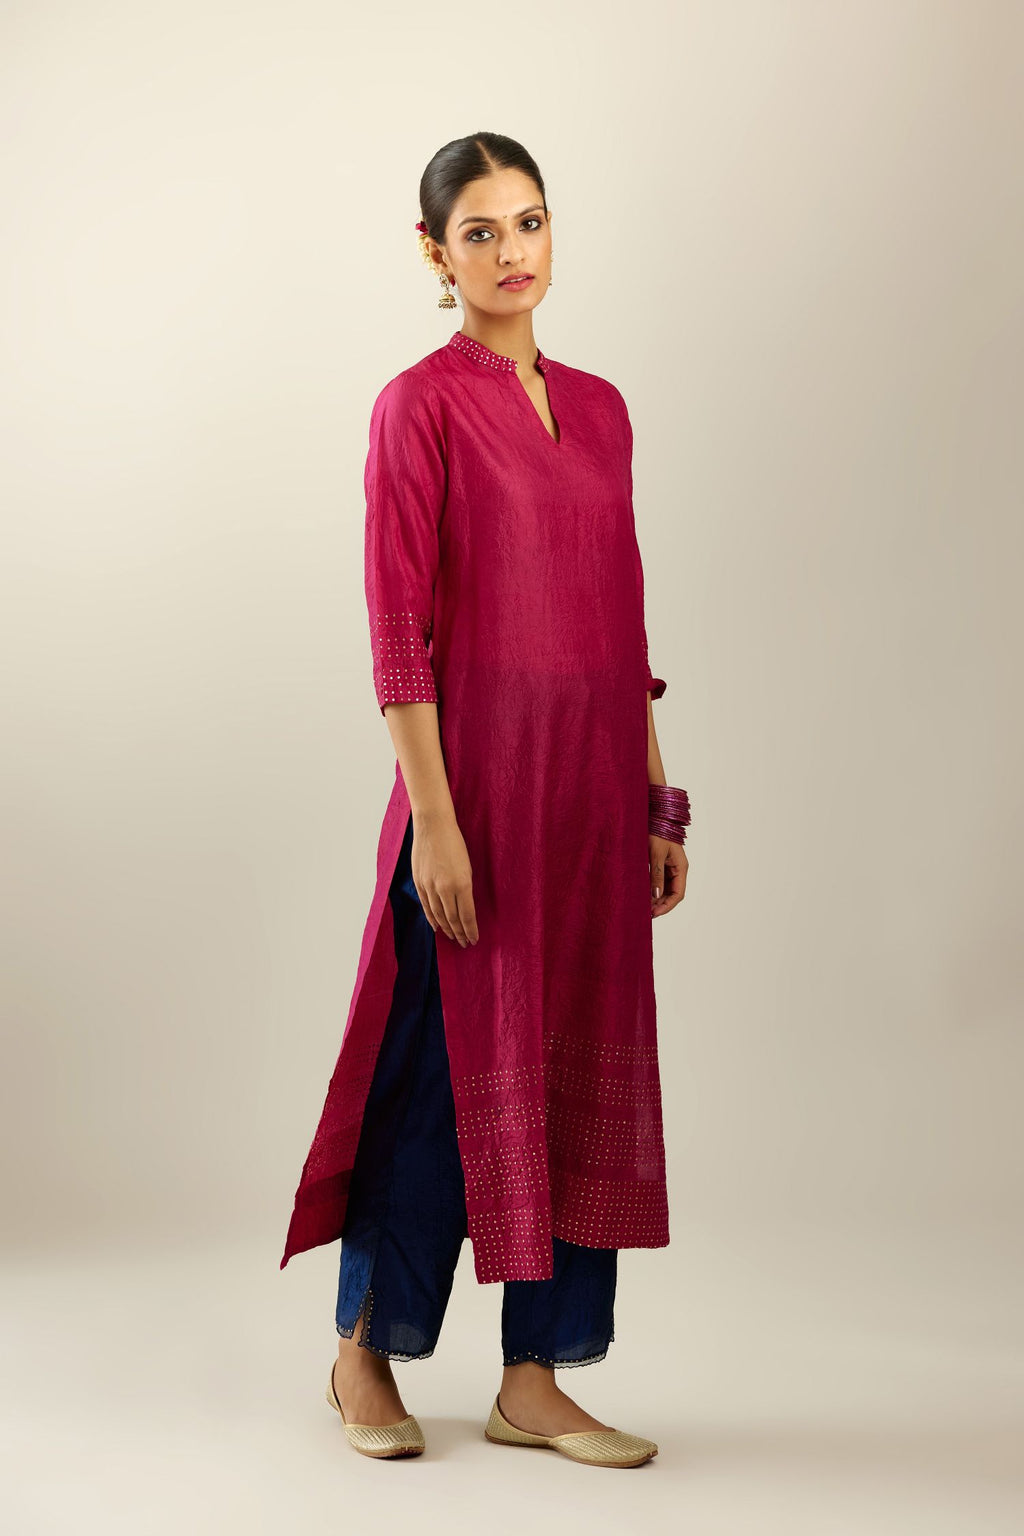 Jazzberry jam silk hand crushed kurta with collar neckline, highlighted with gold sequins.